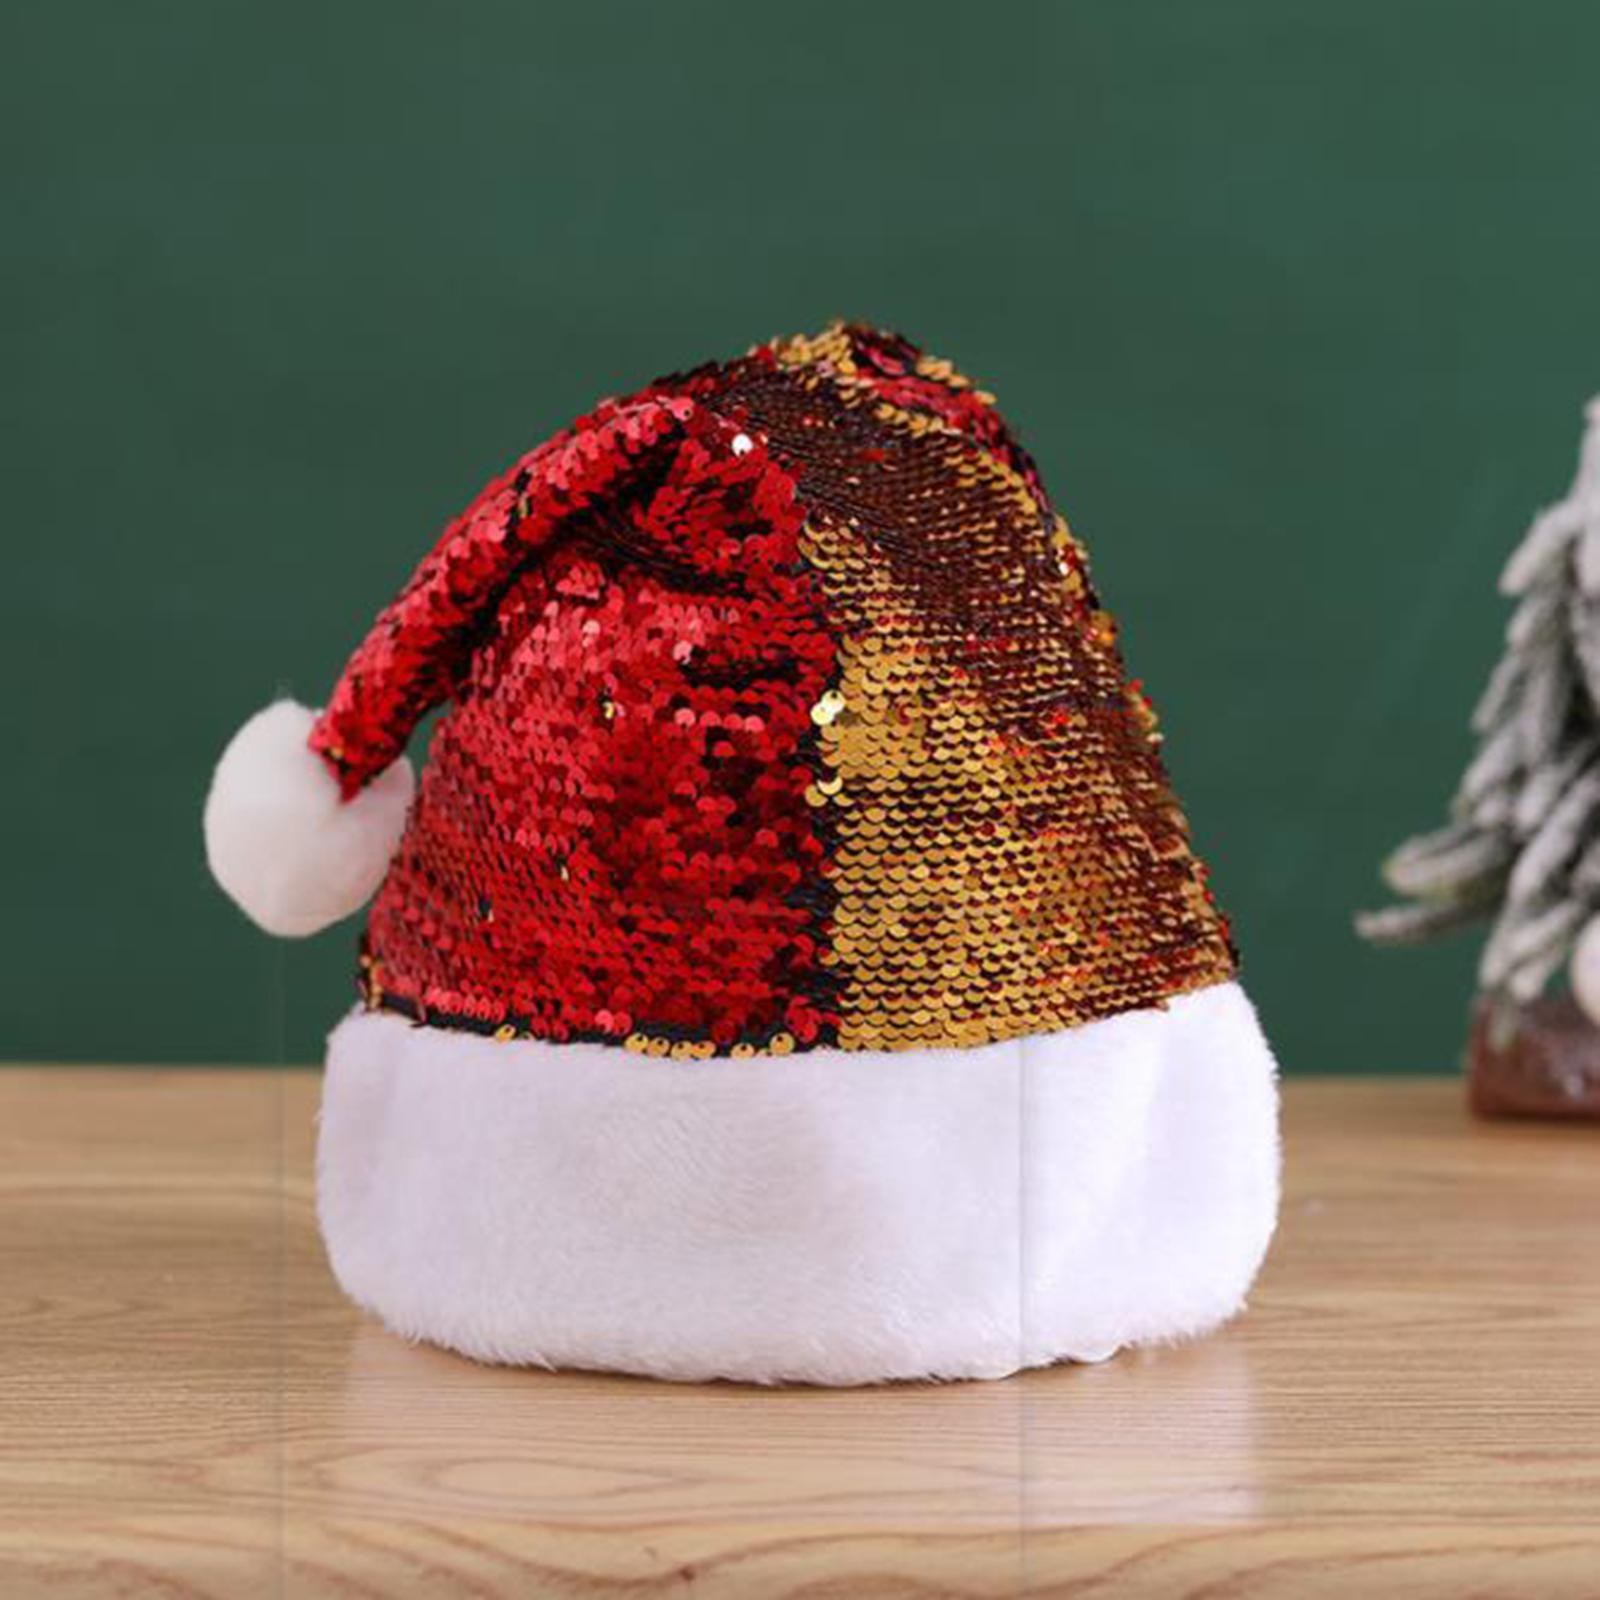 Sequin Christmas Hat Christmas Costume Headwear for Holiday Festive Supplies